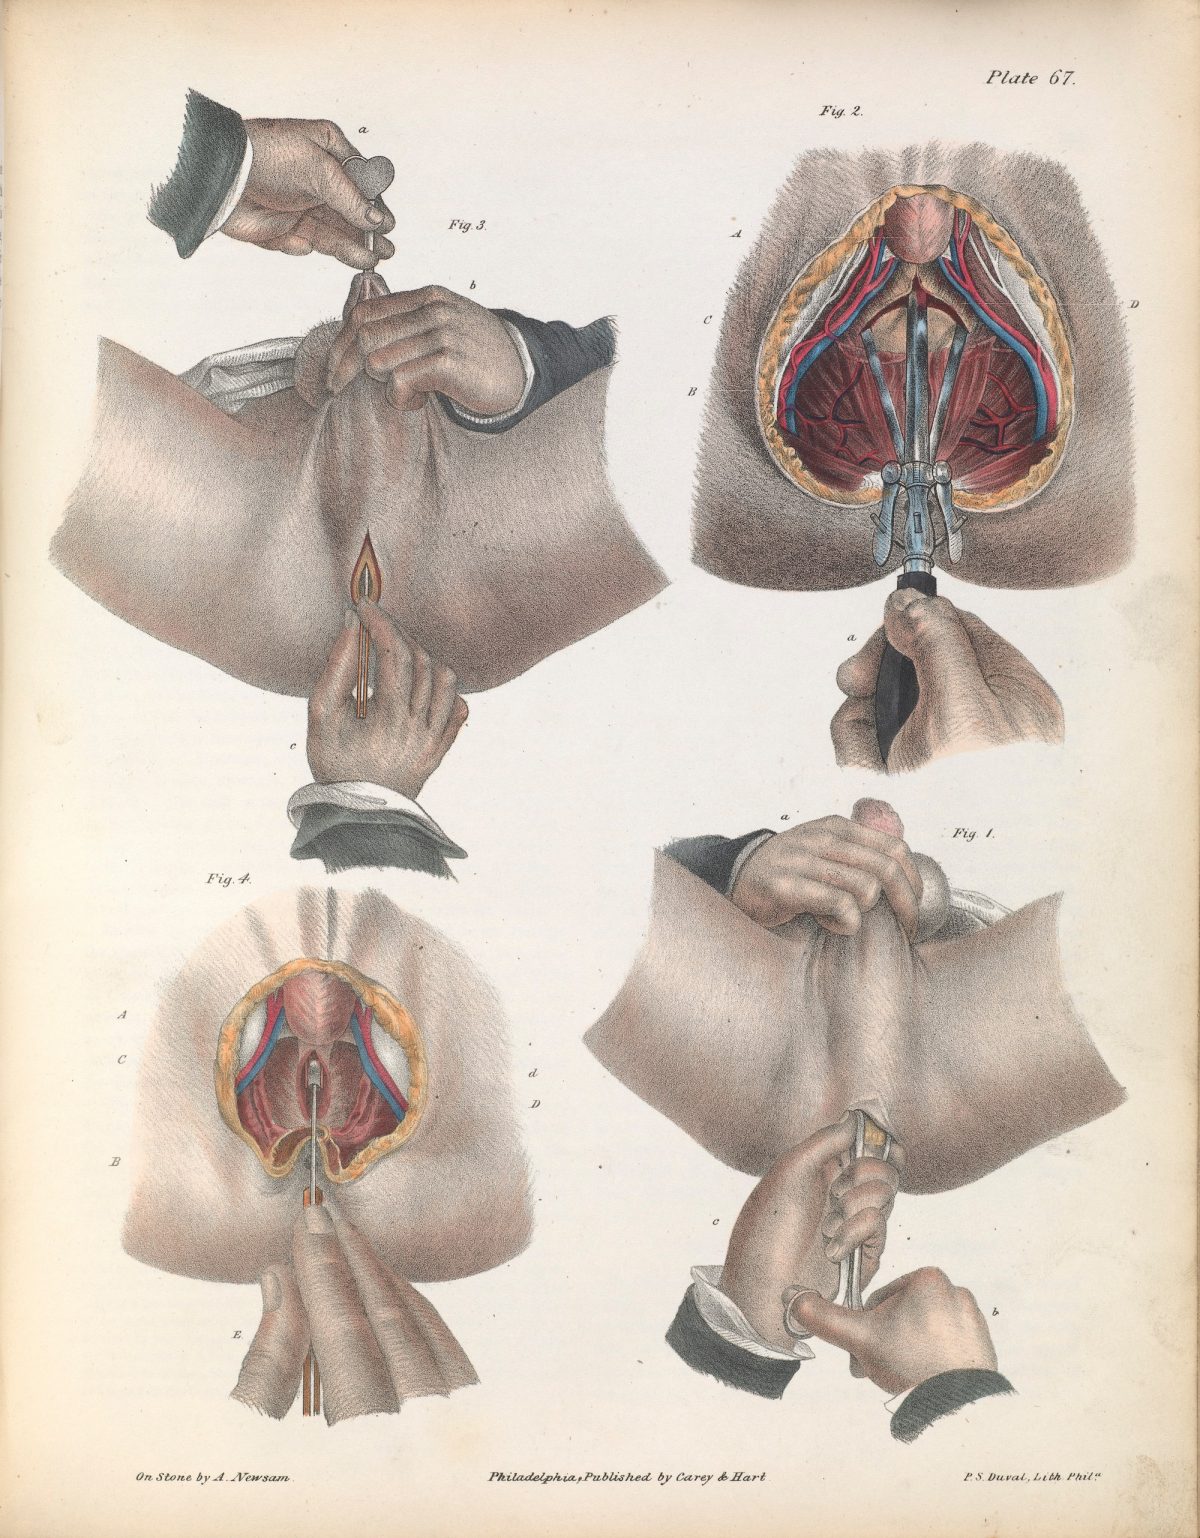 Plate LXVII. Surgical technique for lithotomy (the removal of a bladder stone). Bilateral and vesico-rectal operation.